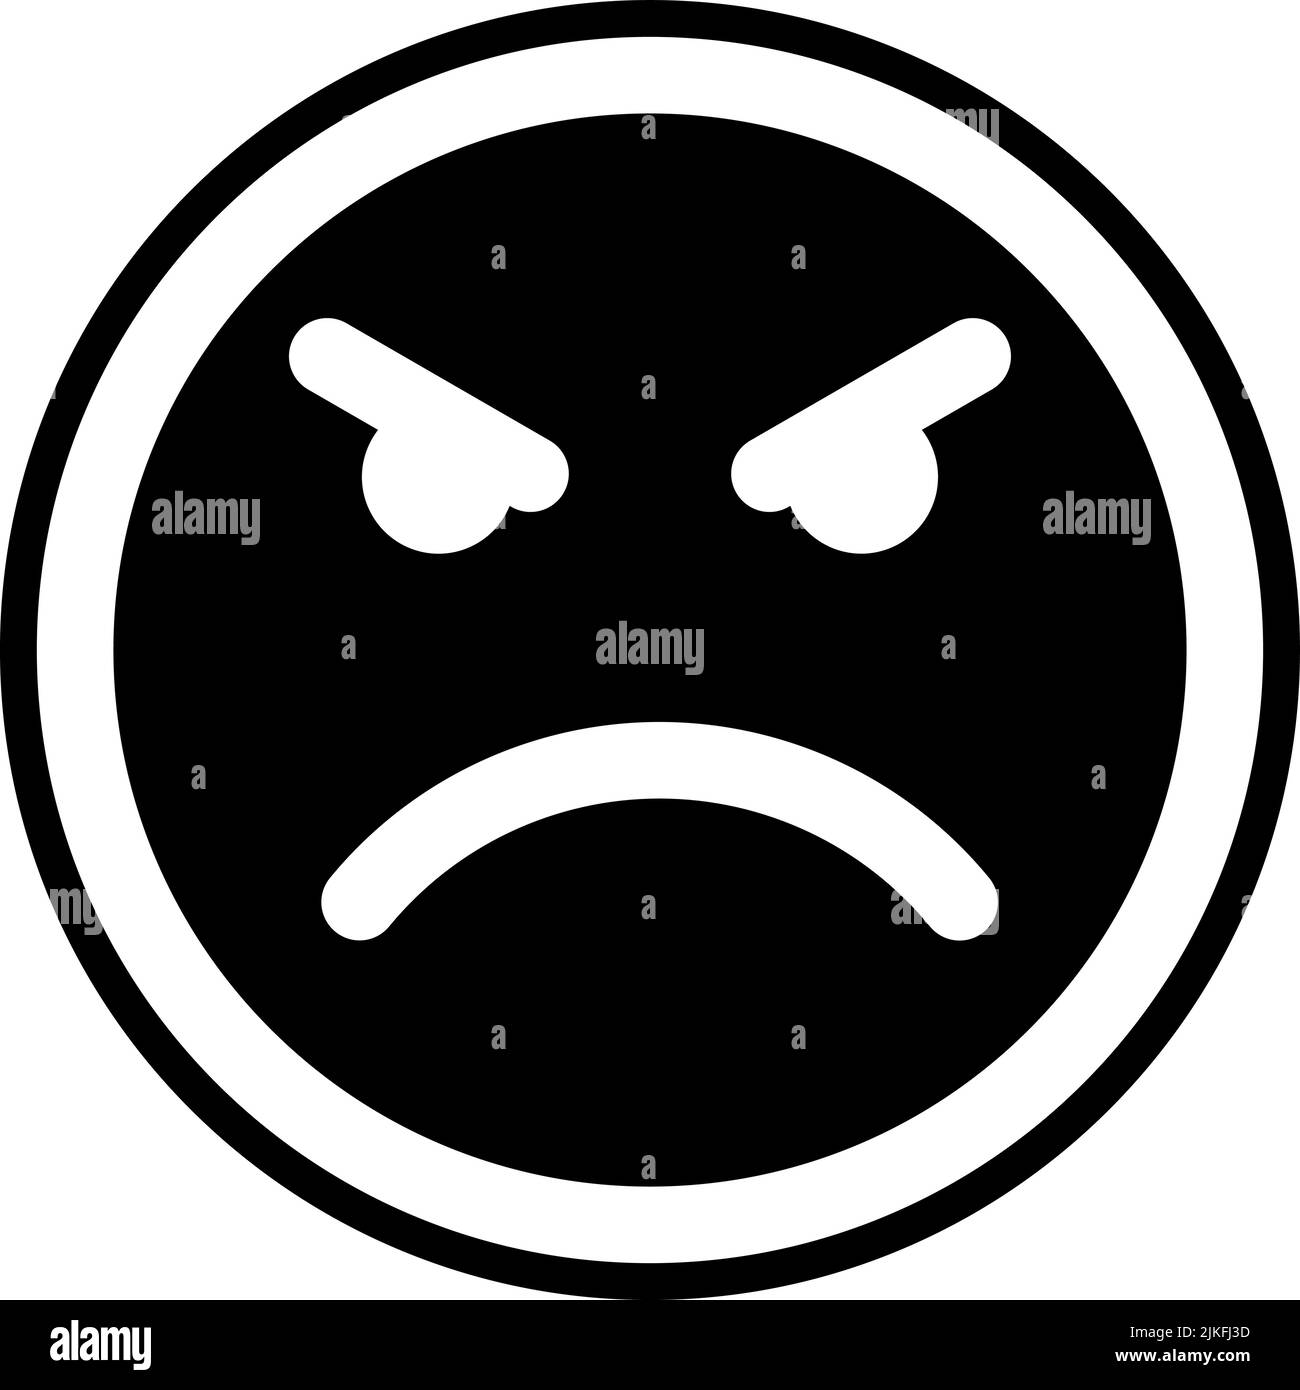 angry icon black vector illustration. Stock Vector